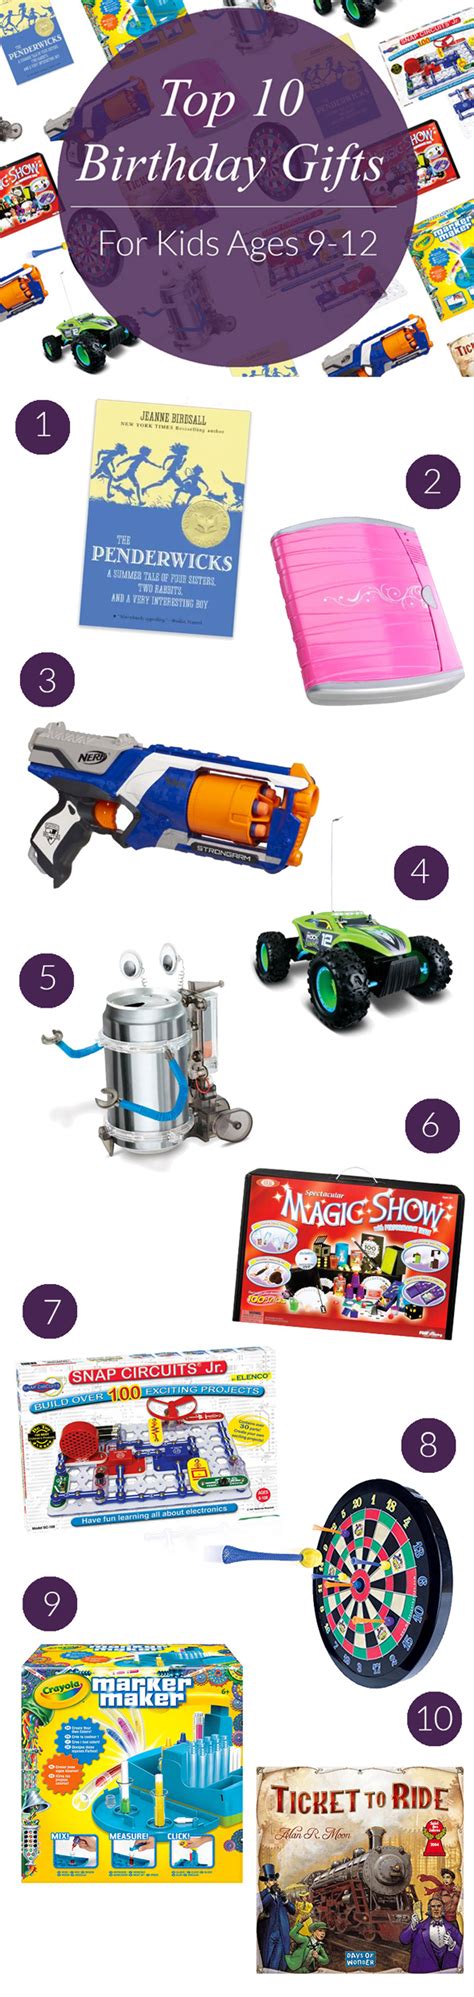 You'll love that it's durable and easy to clean. Top 10 Birthday Gifts for Kids Ages 9-12 - Evite